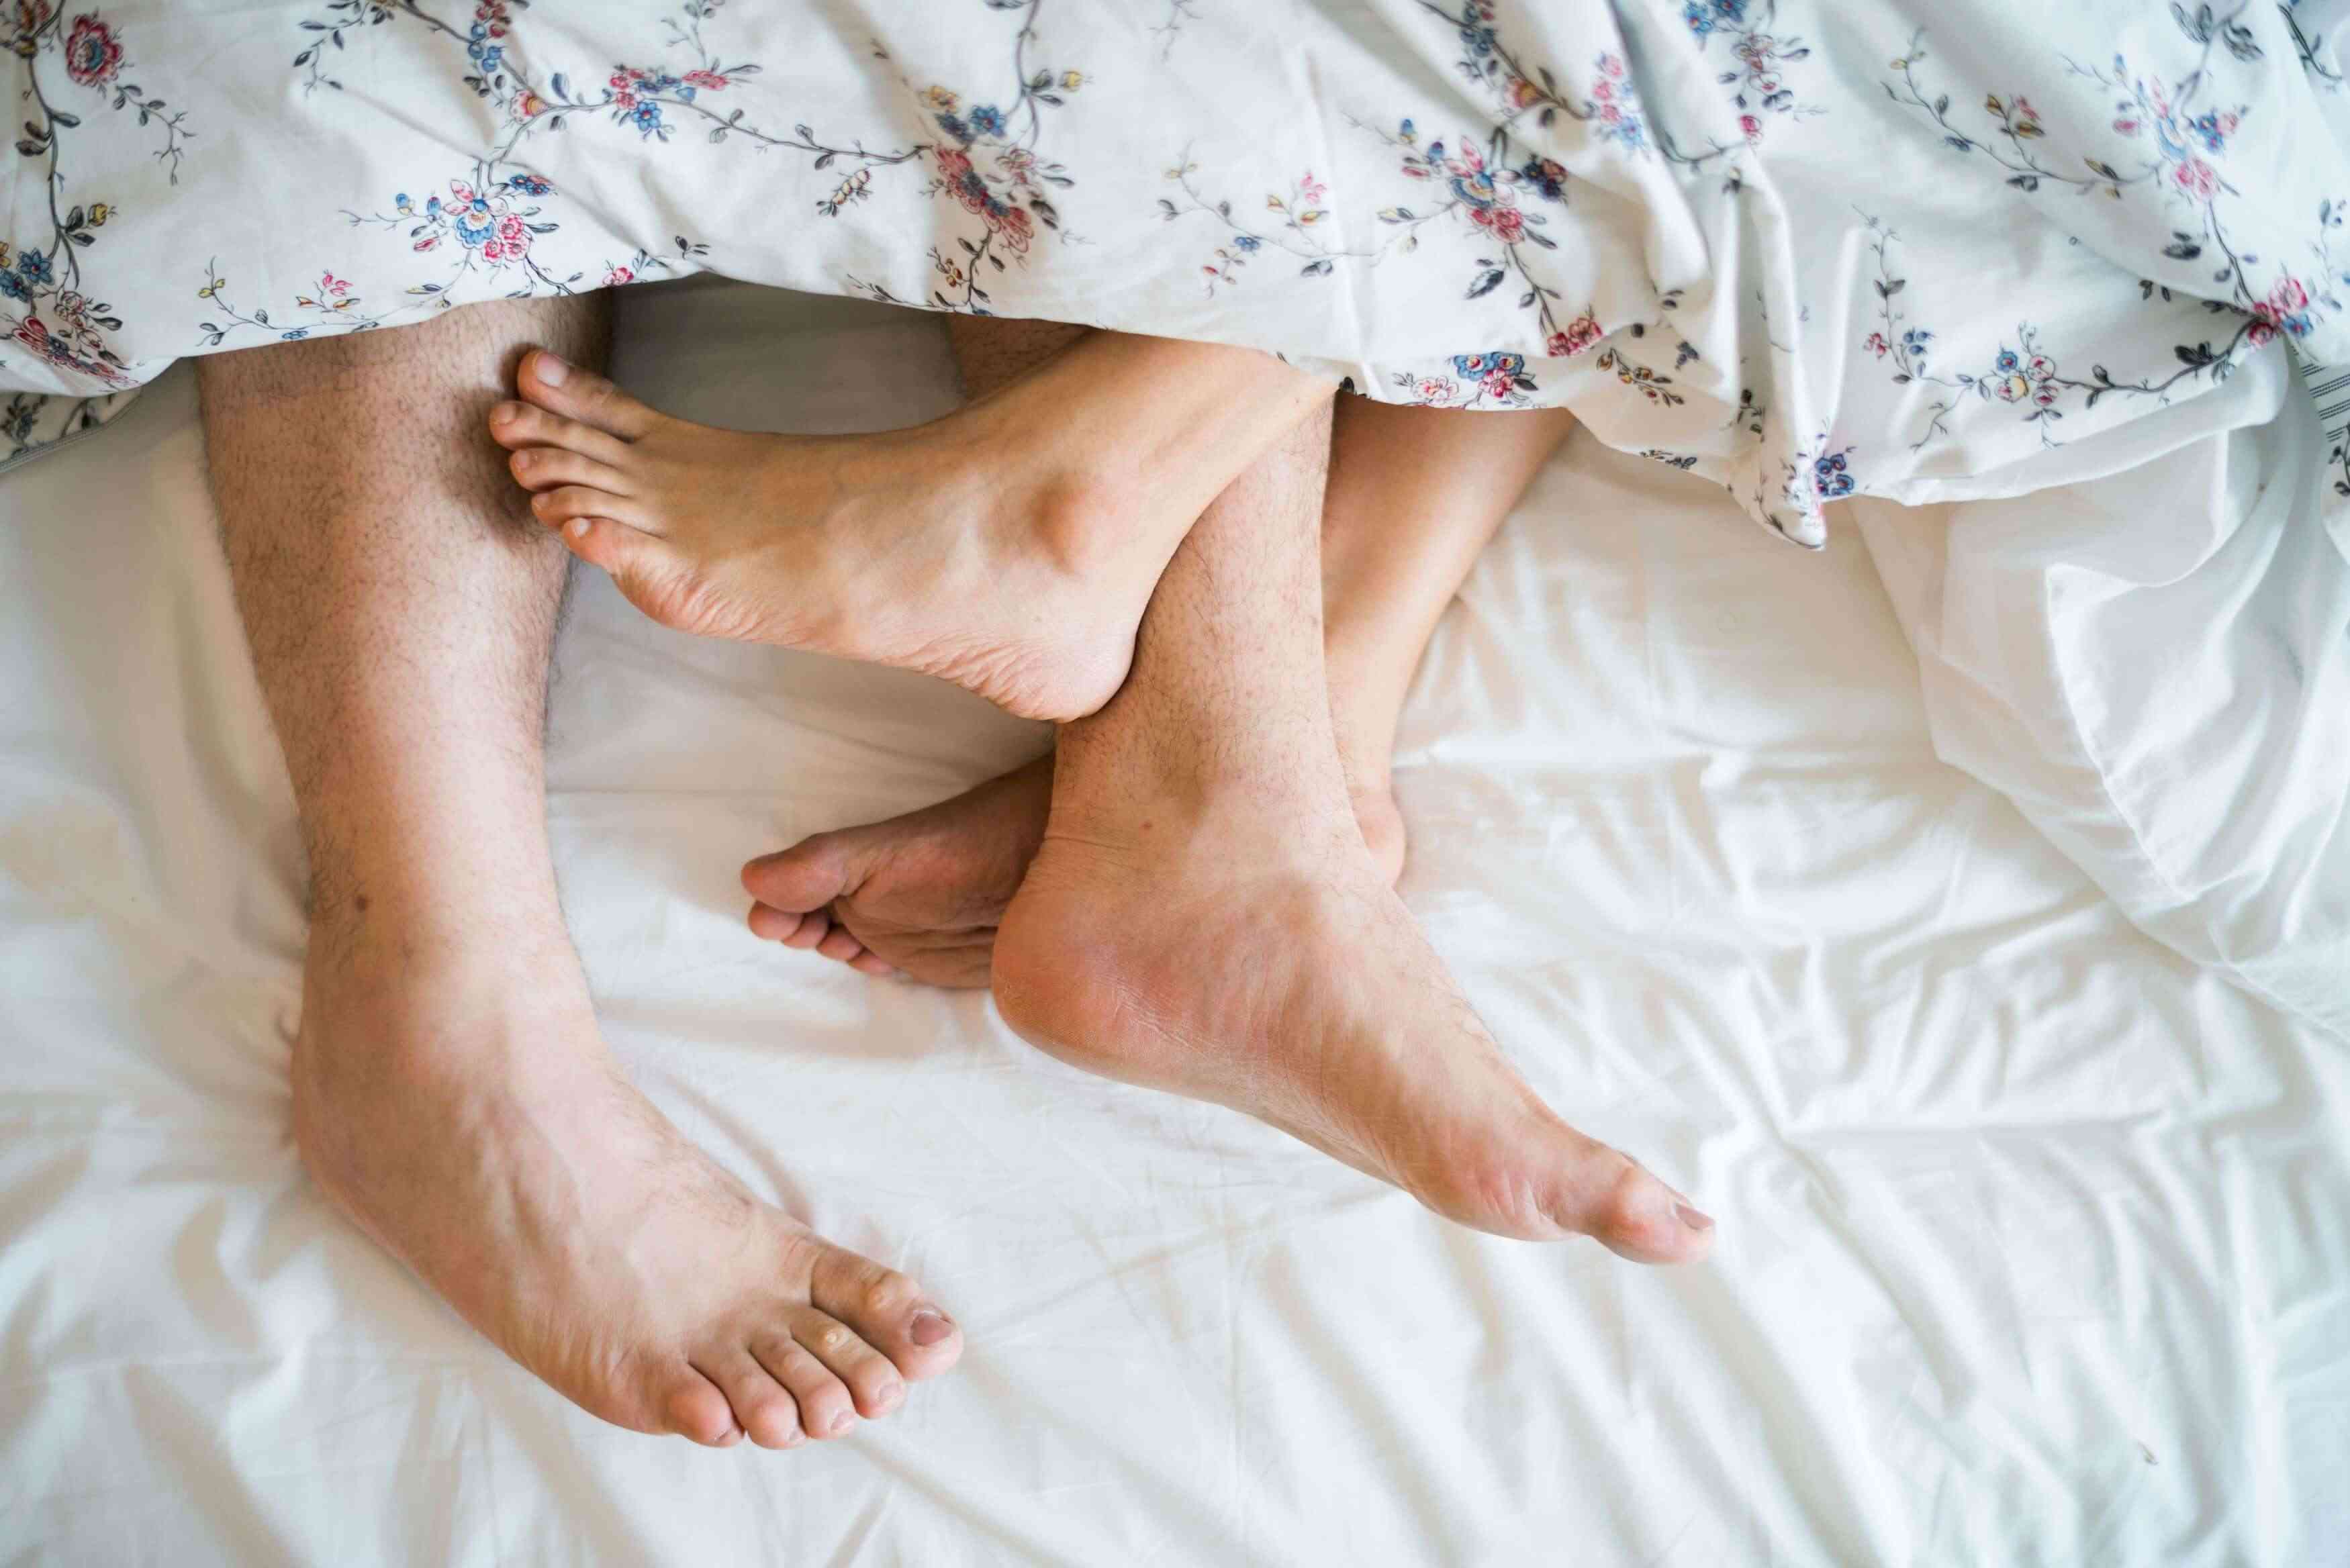 10 Fun Sex Ideas That Can Bring Passion Back To The Bedroom Regain image